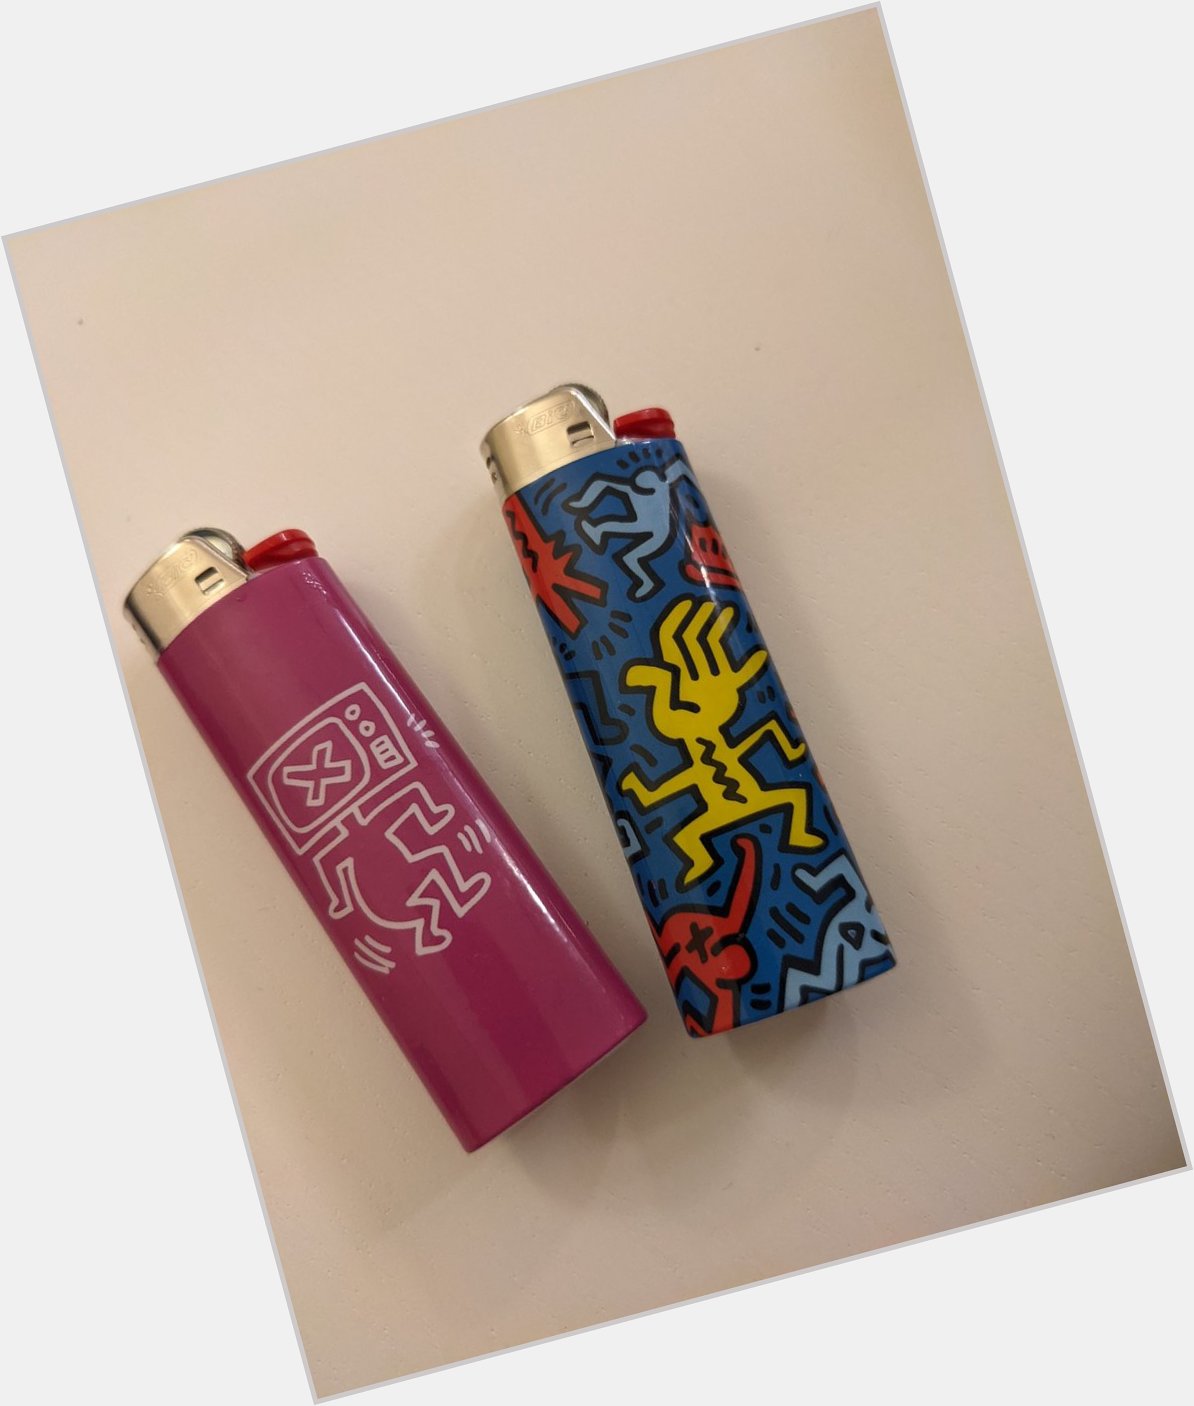 Happy Keith Haring bday from me and my lighters 